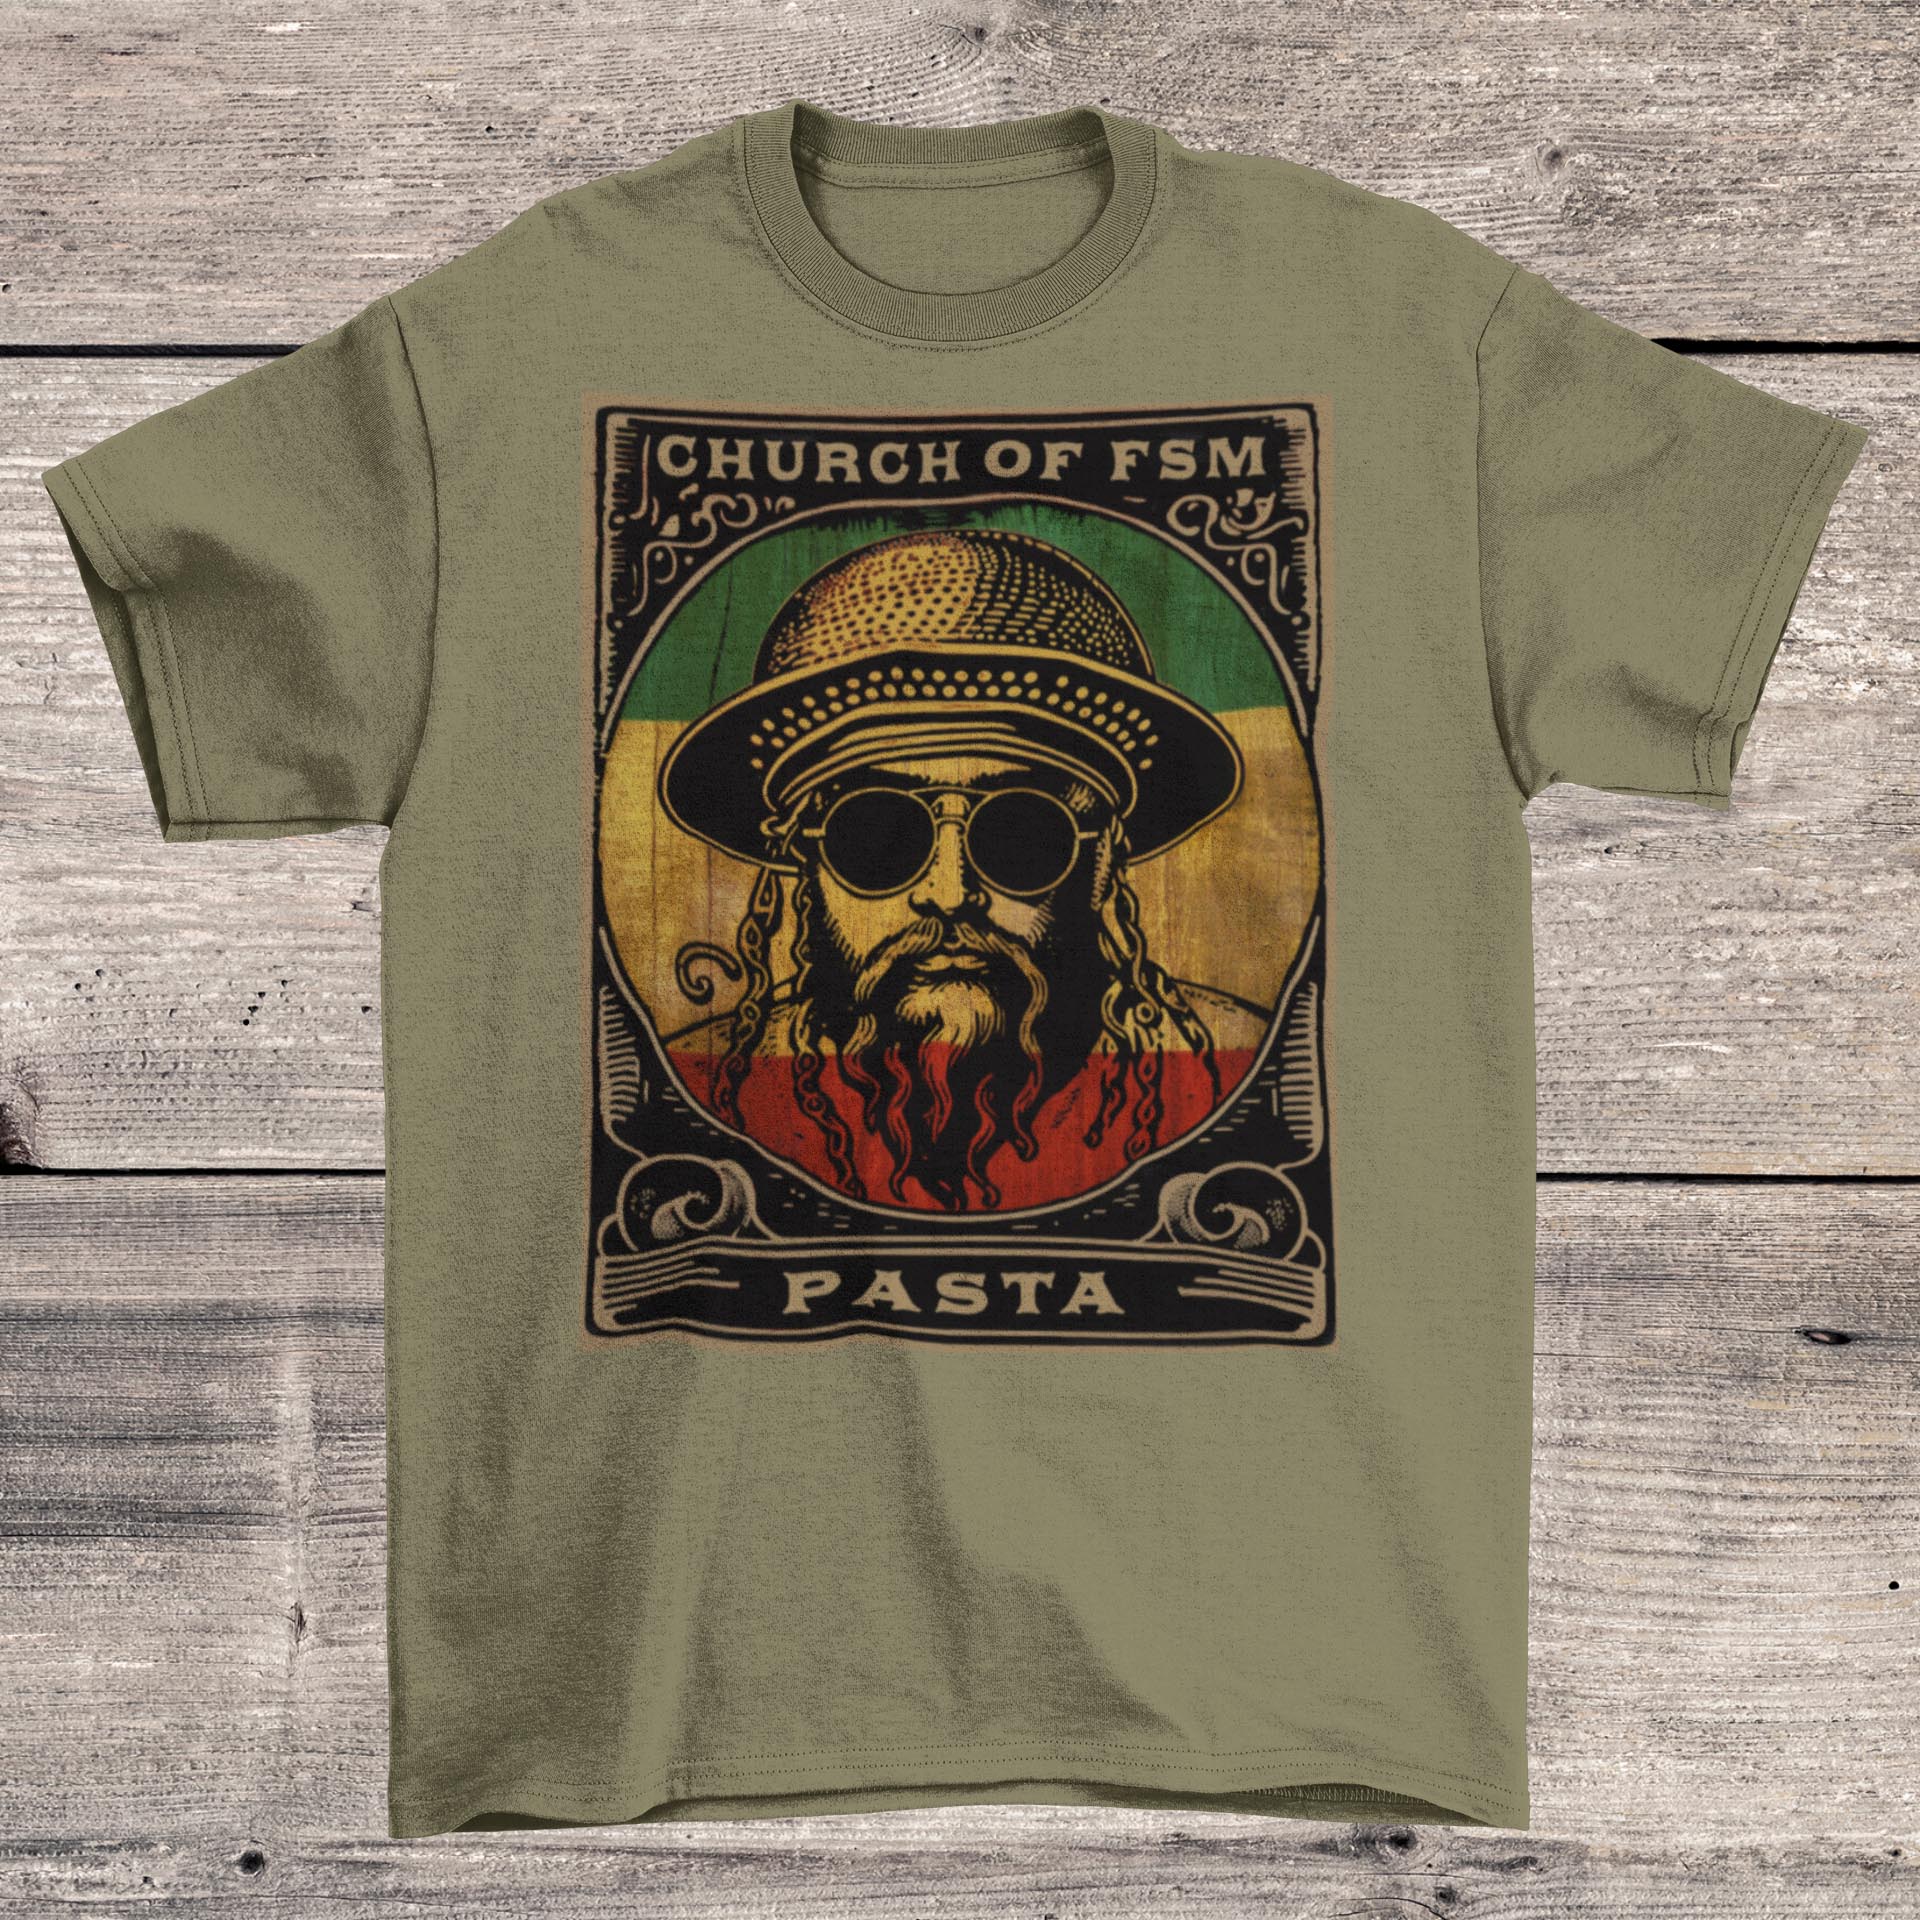 T-Shirts XS / Heather Olive Pastafarianism & The Flying Spaghetti Monster (FSM) | Reggae and Atheist Inspired Pasta Graphic Art T-Shirt